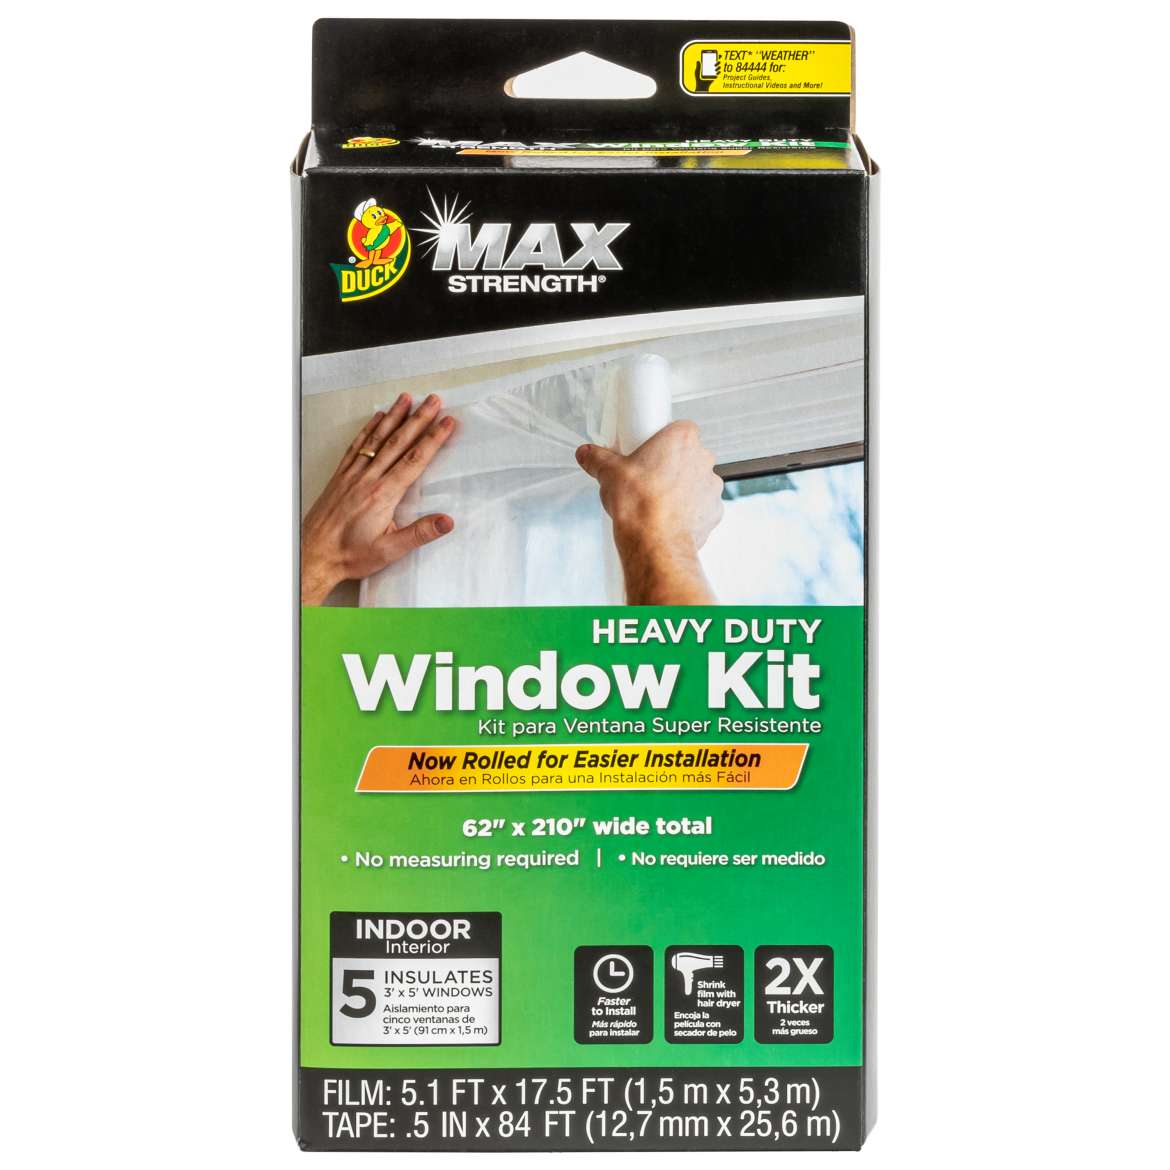 Duck Max Strength® Rolled Window Kit - Clear, 5 pk, 62 in. x 210 in.